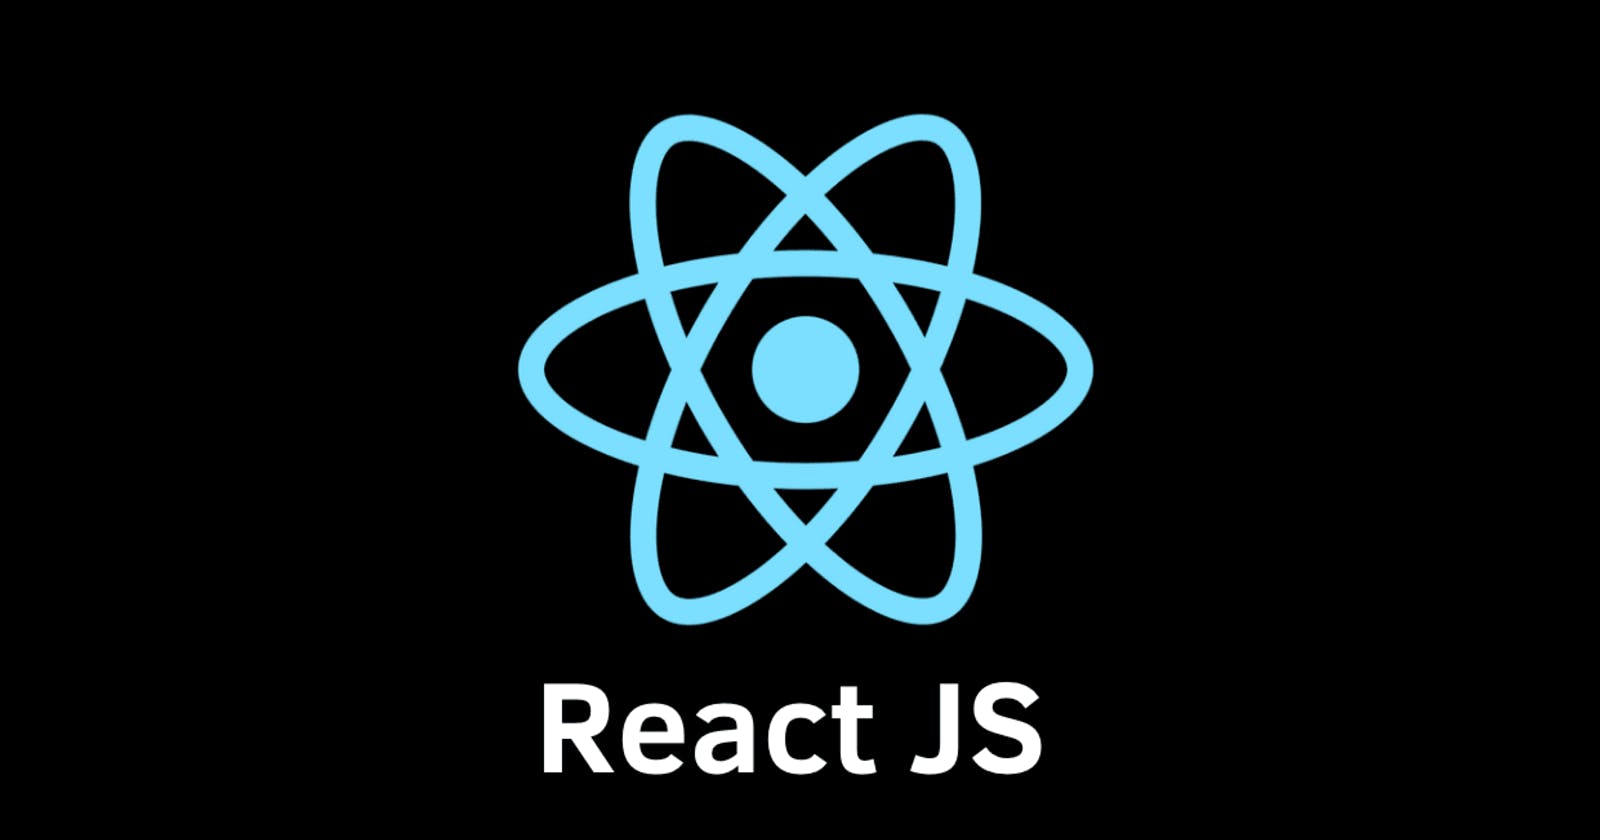 How To Hide Your Source Code When Using ReactJS?